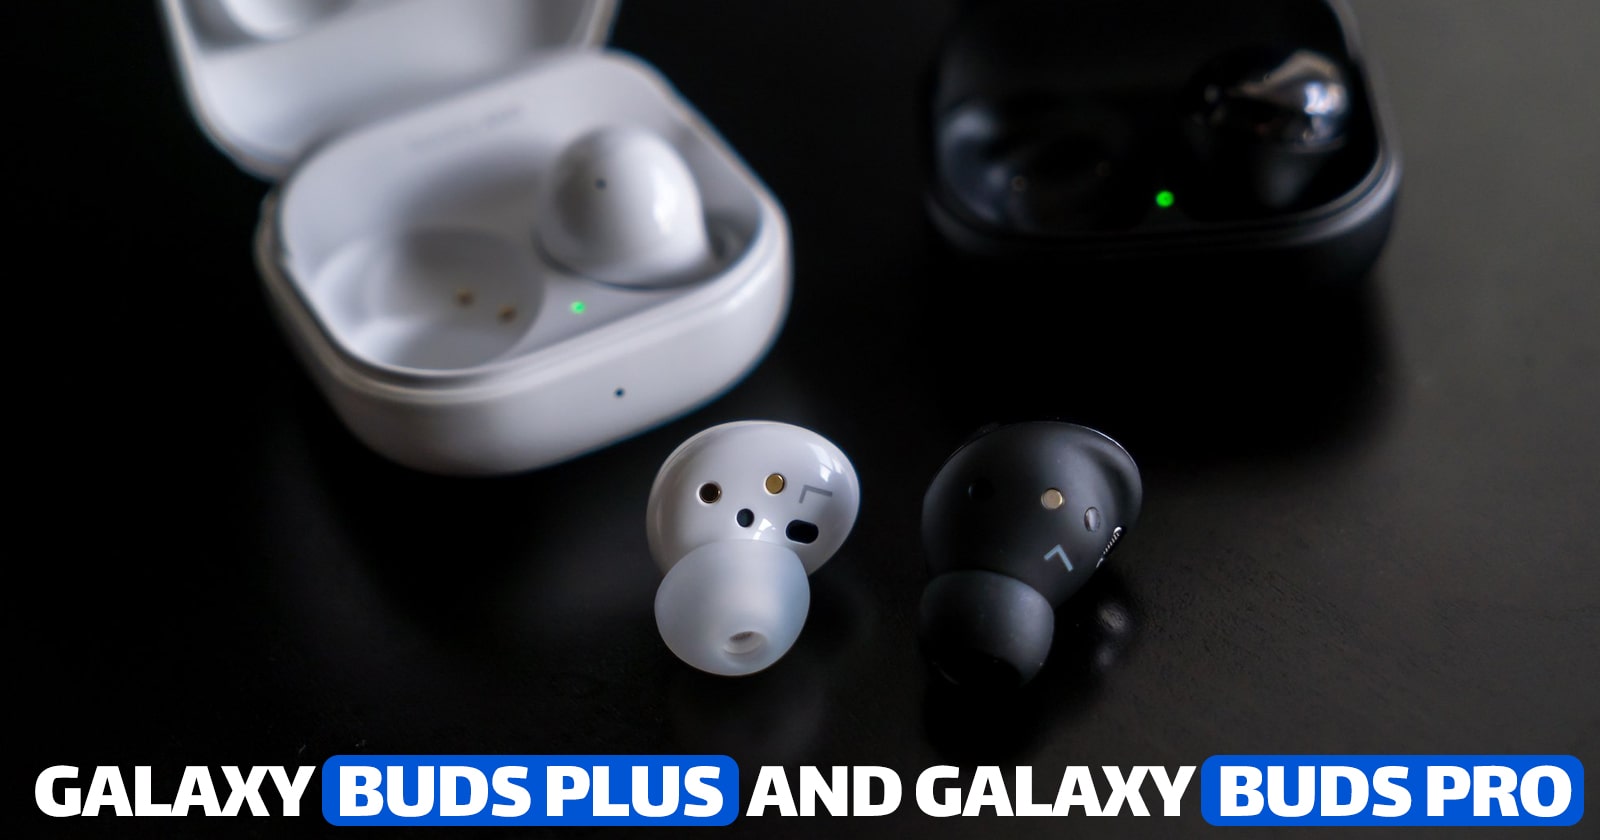 What Is the Difference Between Galaxy Buds Plus and Galaxy Buds Pro